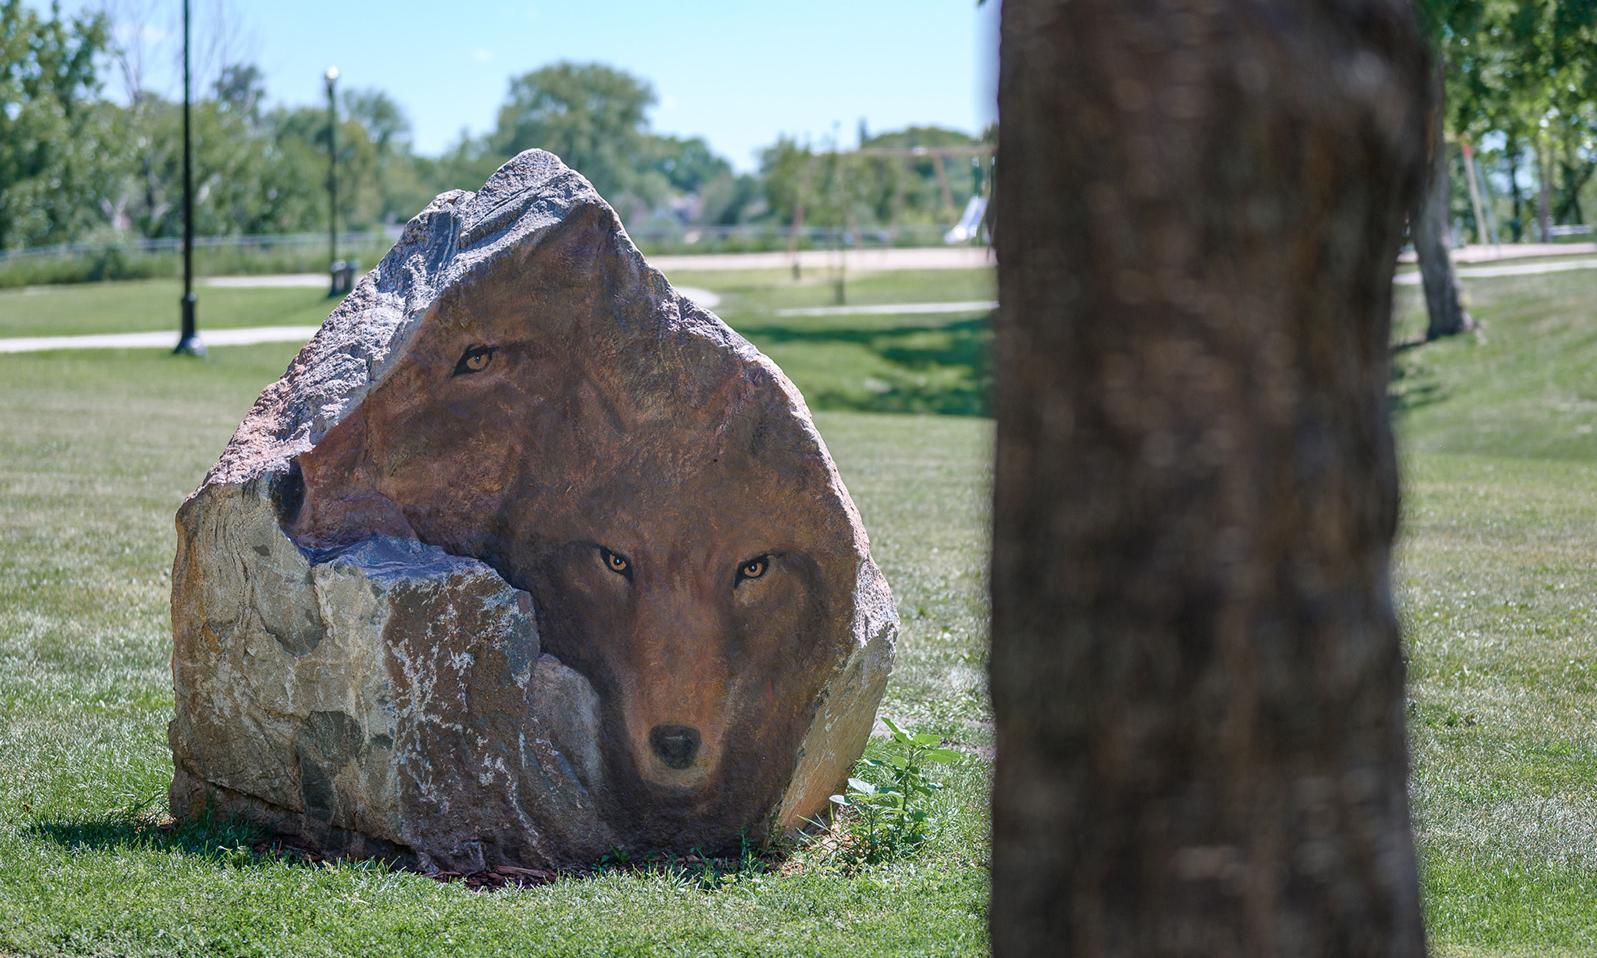 A large boulder with the faces of two wolves painted on it sits prominently in the park facing the healing forest.